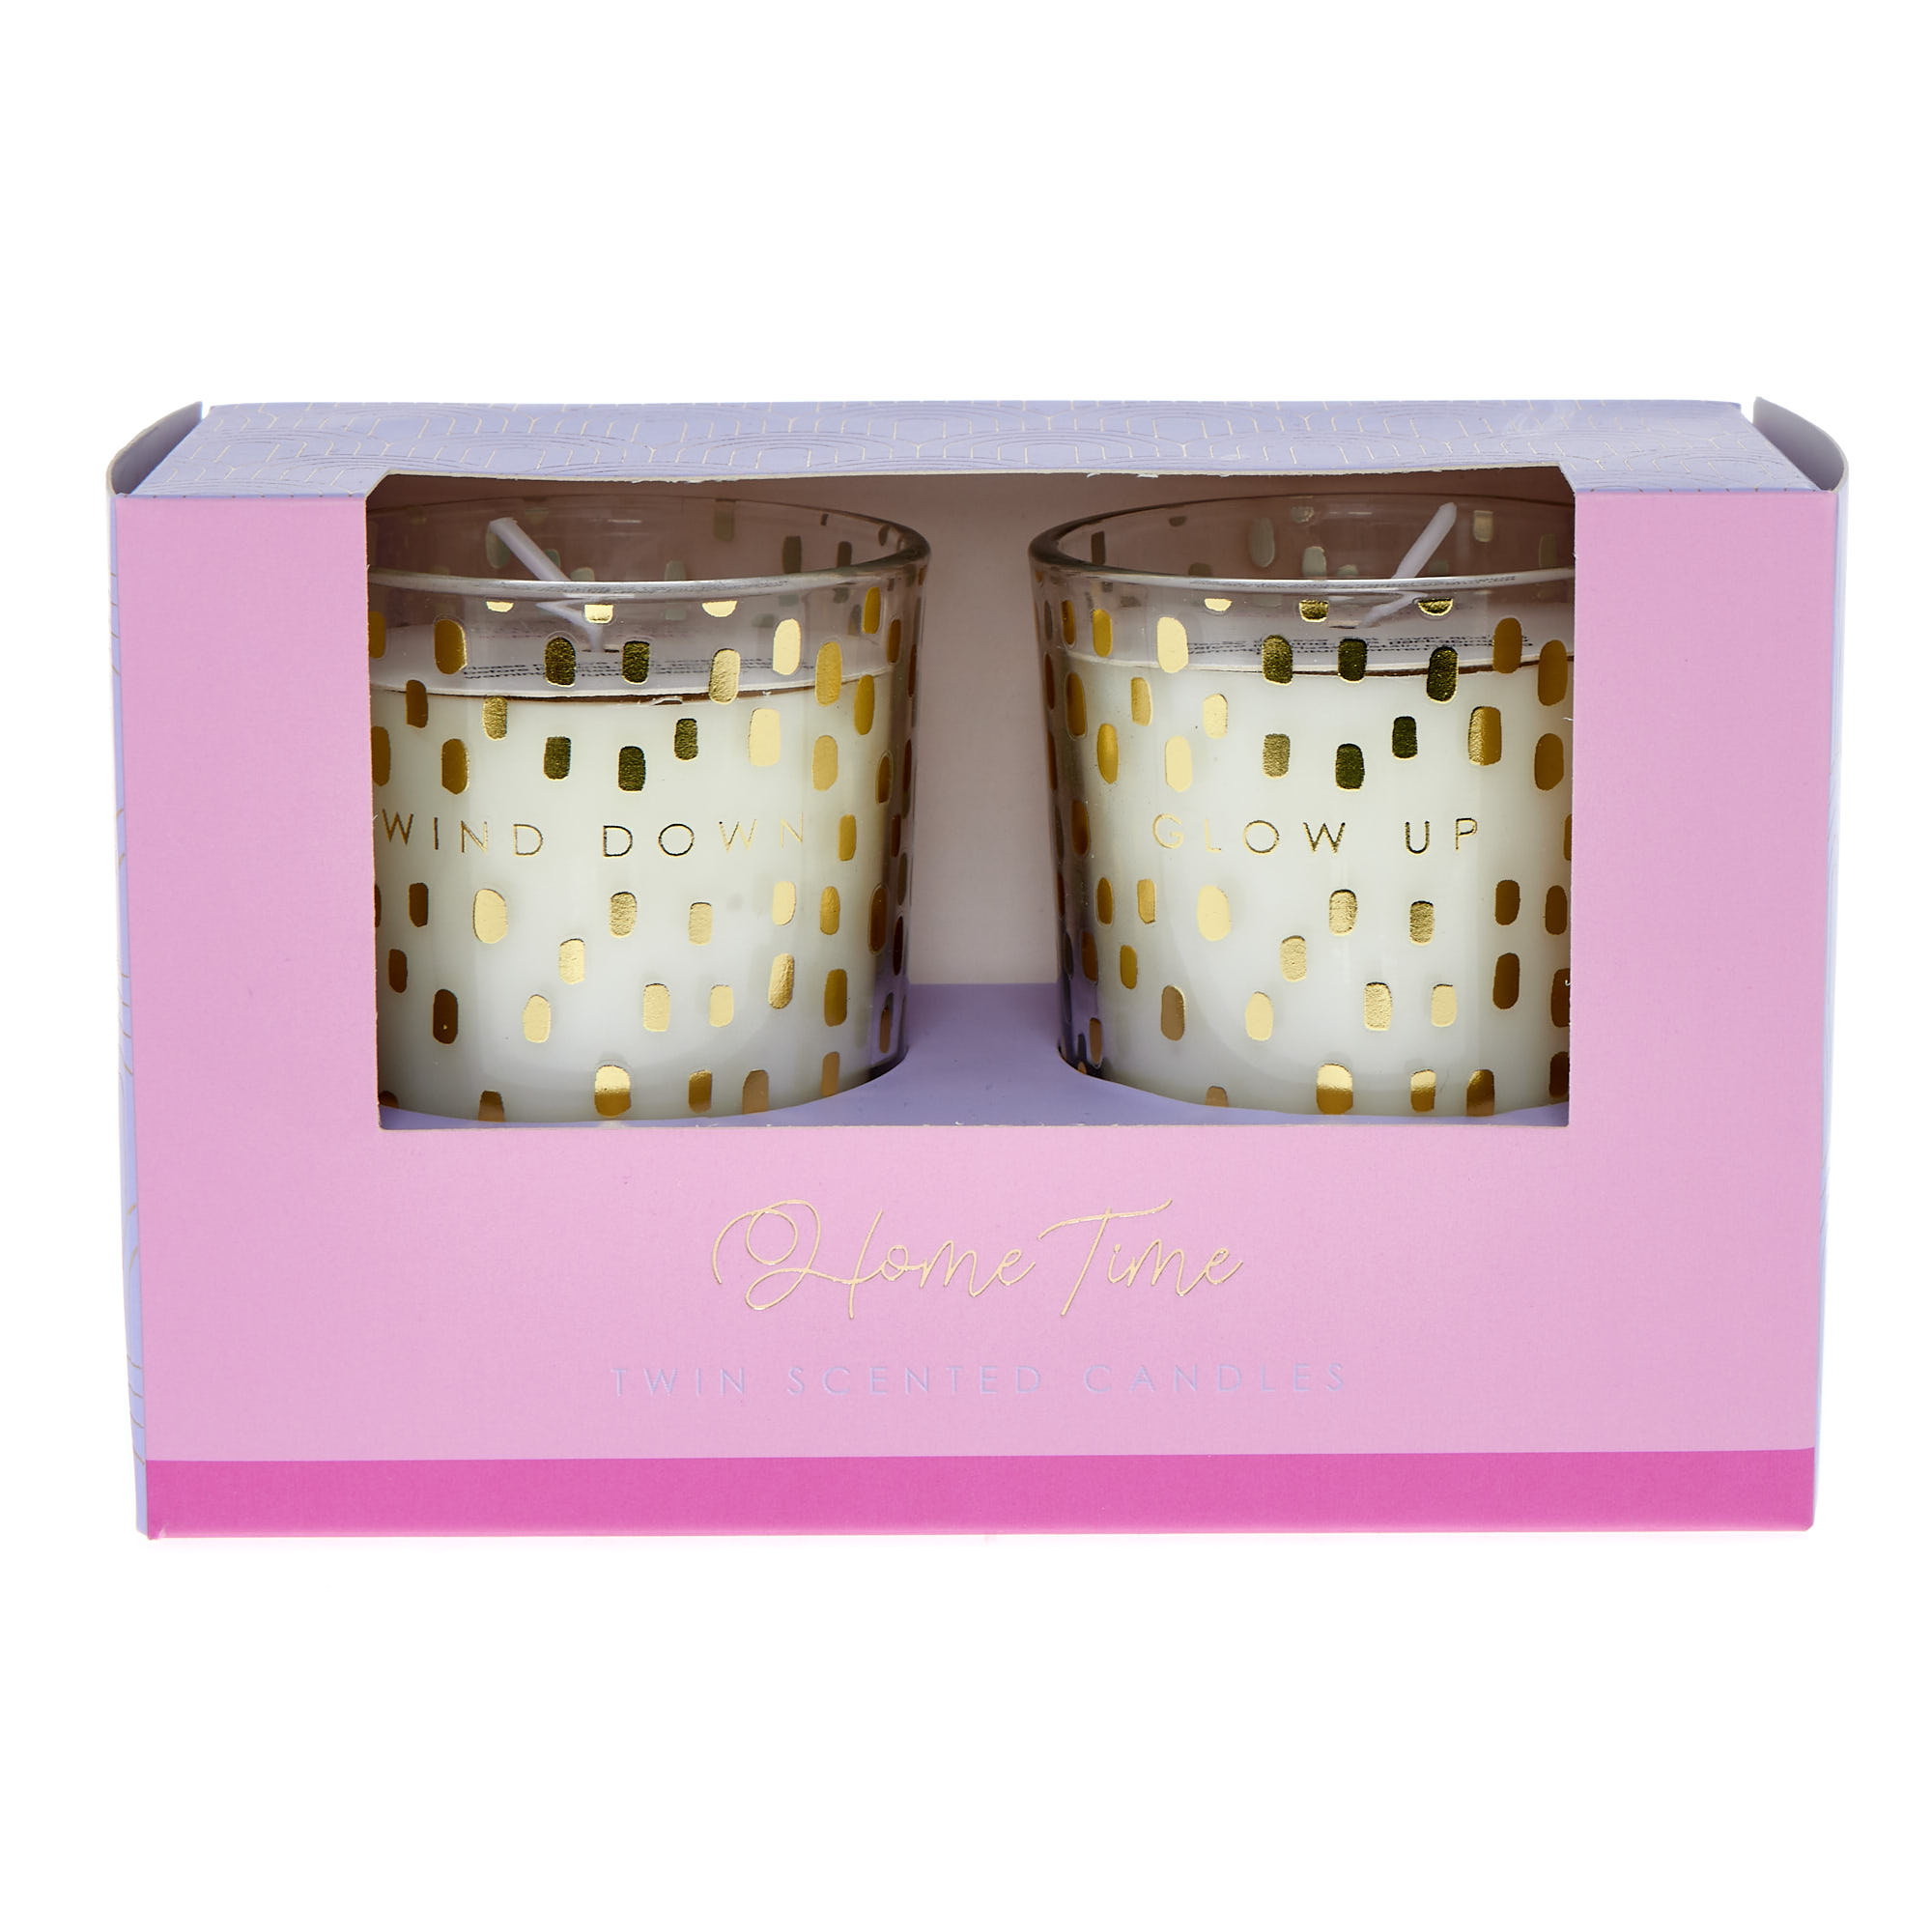 Wind Down Glow Up Vanilla Scented Candle Set